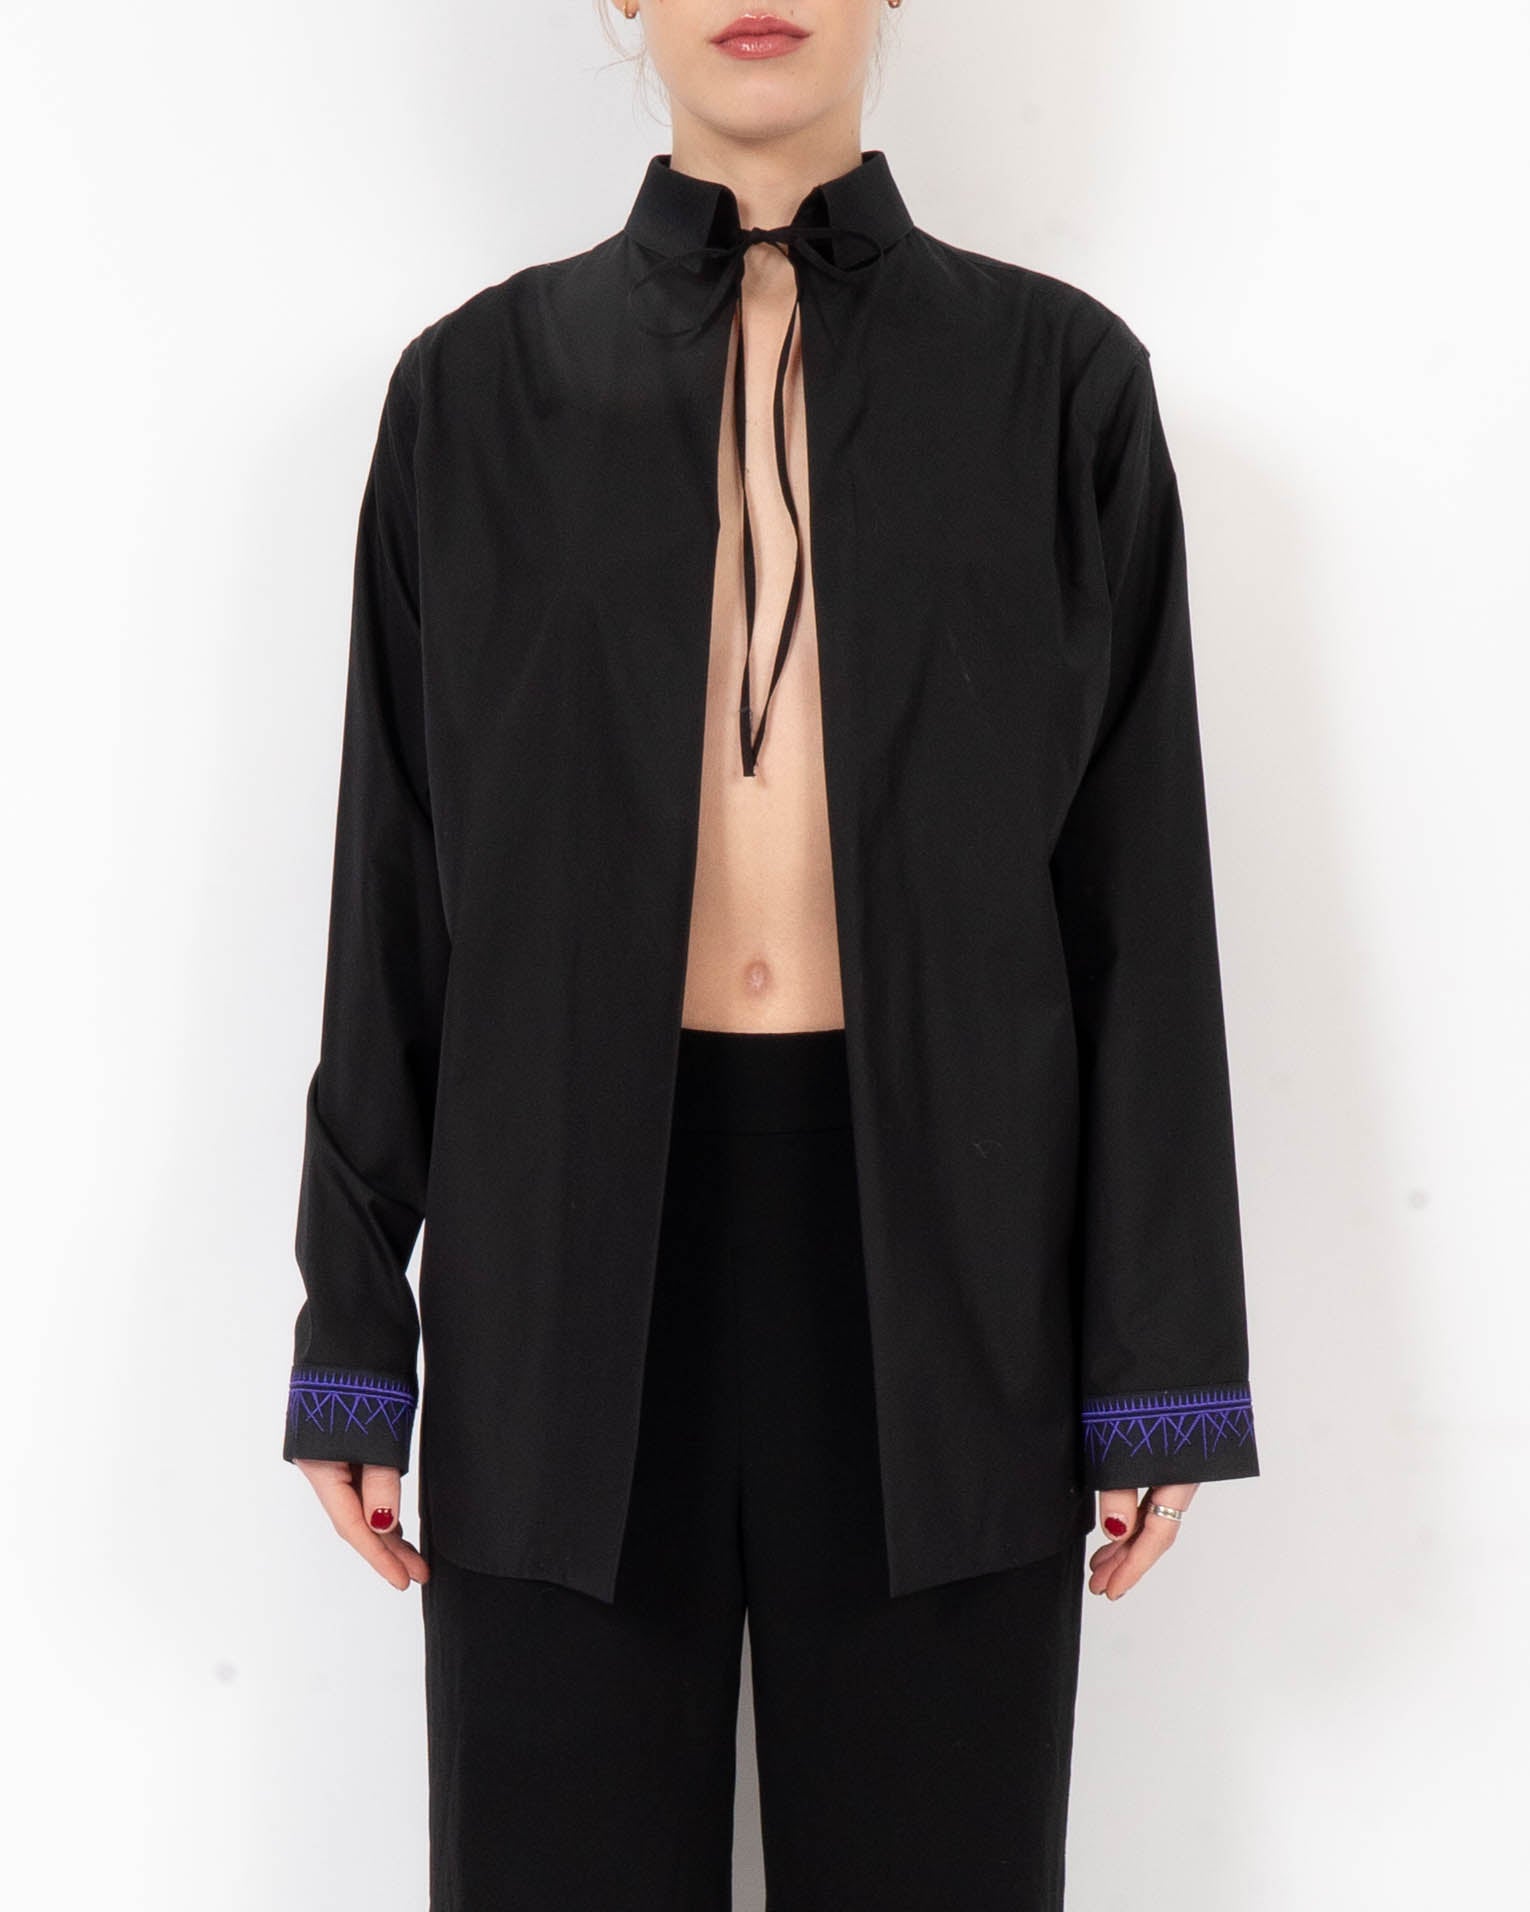 SS19 Open Shirt in Black Cotton with Purple Cuff Embroidery